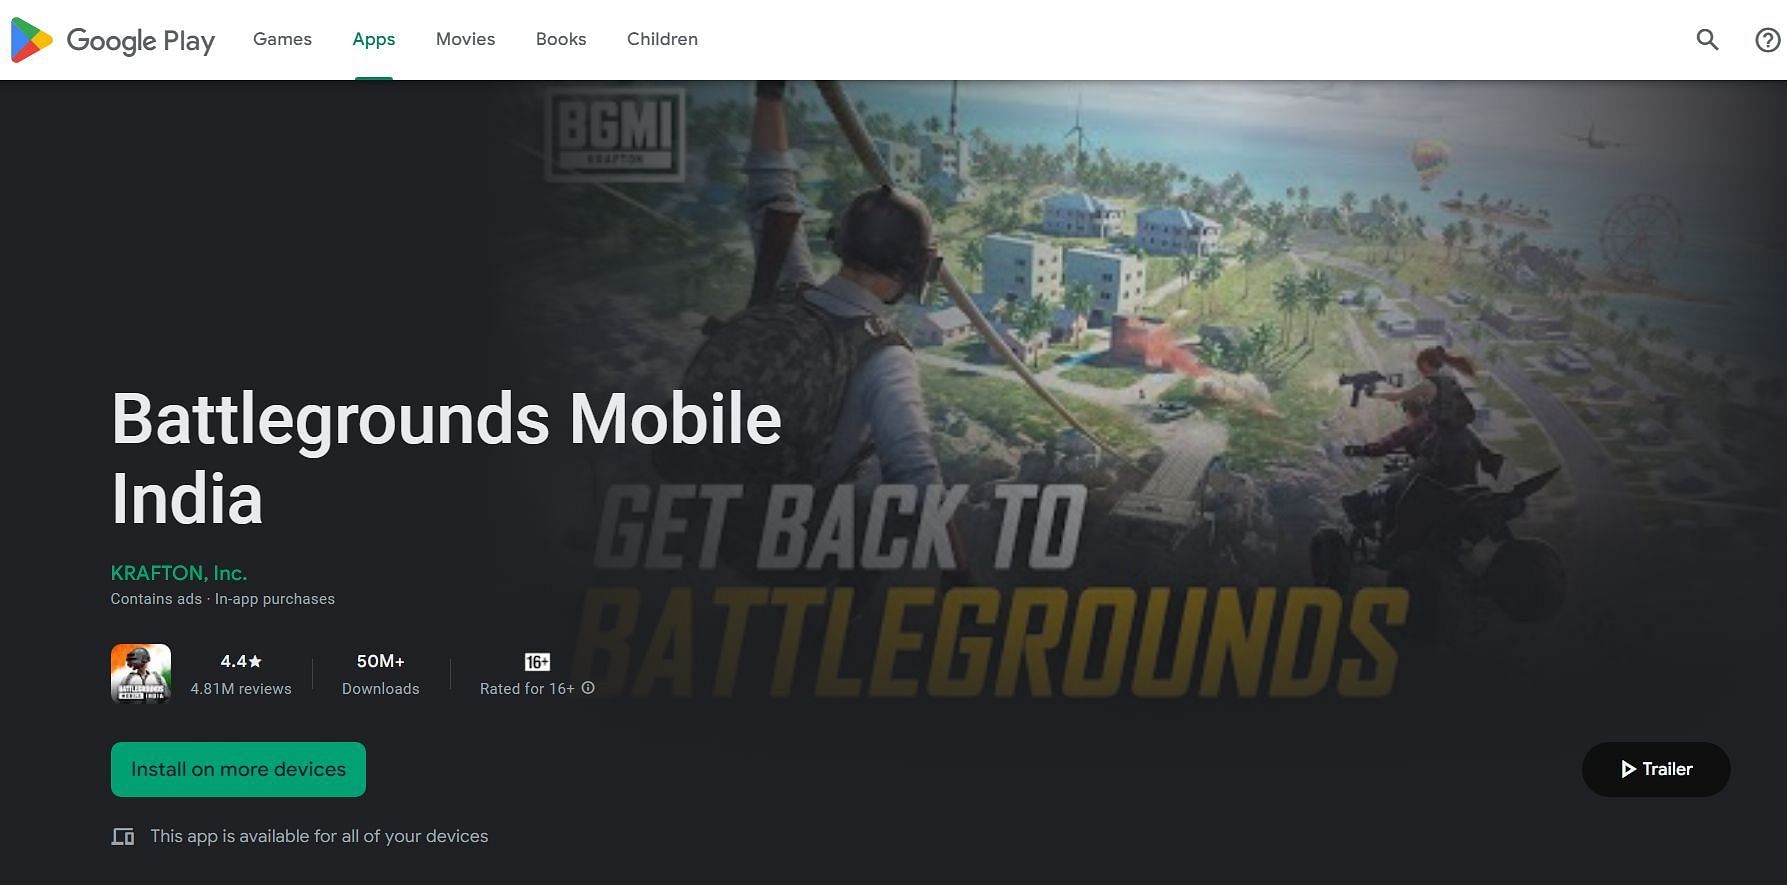 Players can install the game in advance from Play Store before the servers become available (Image via Google)